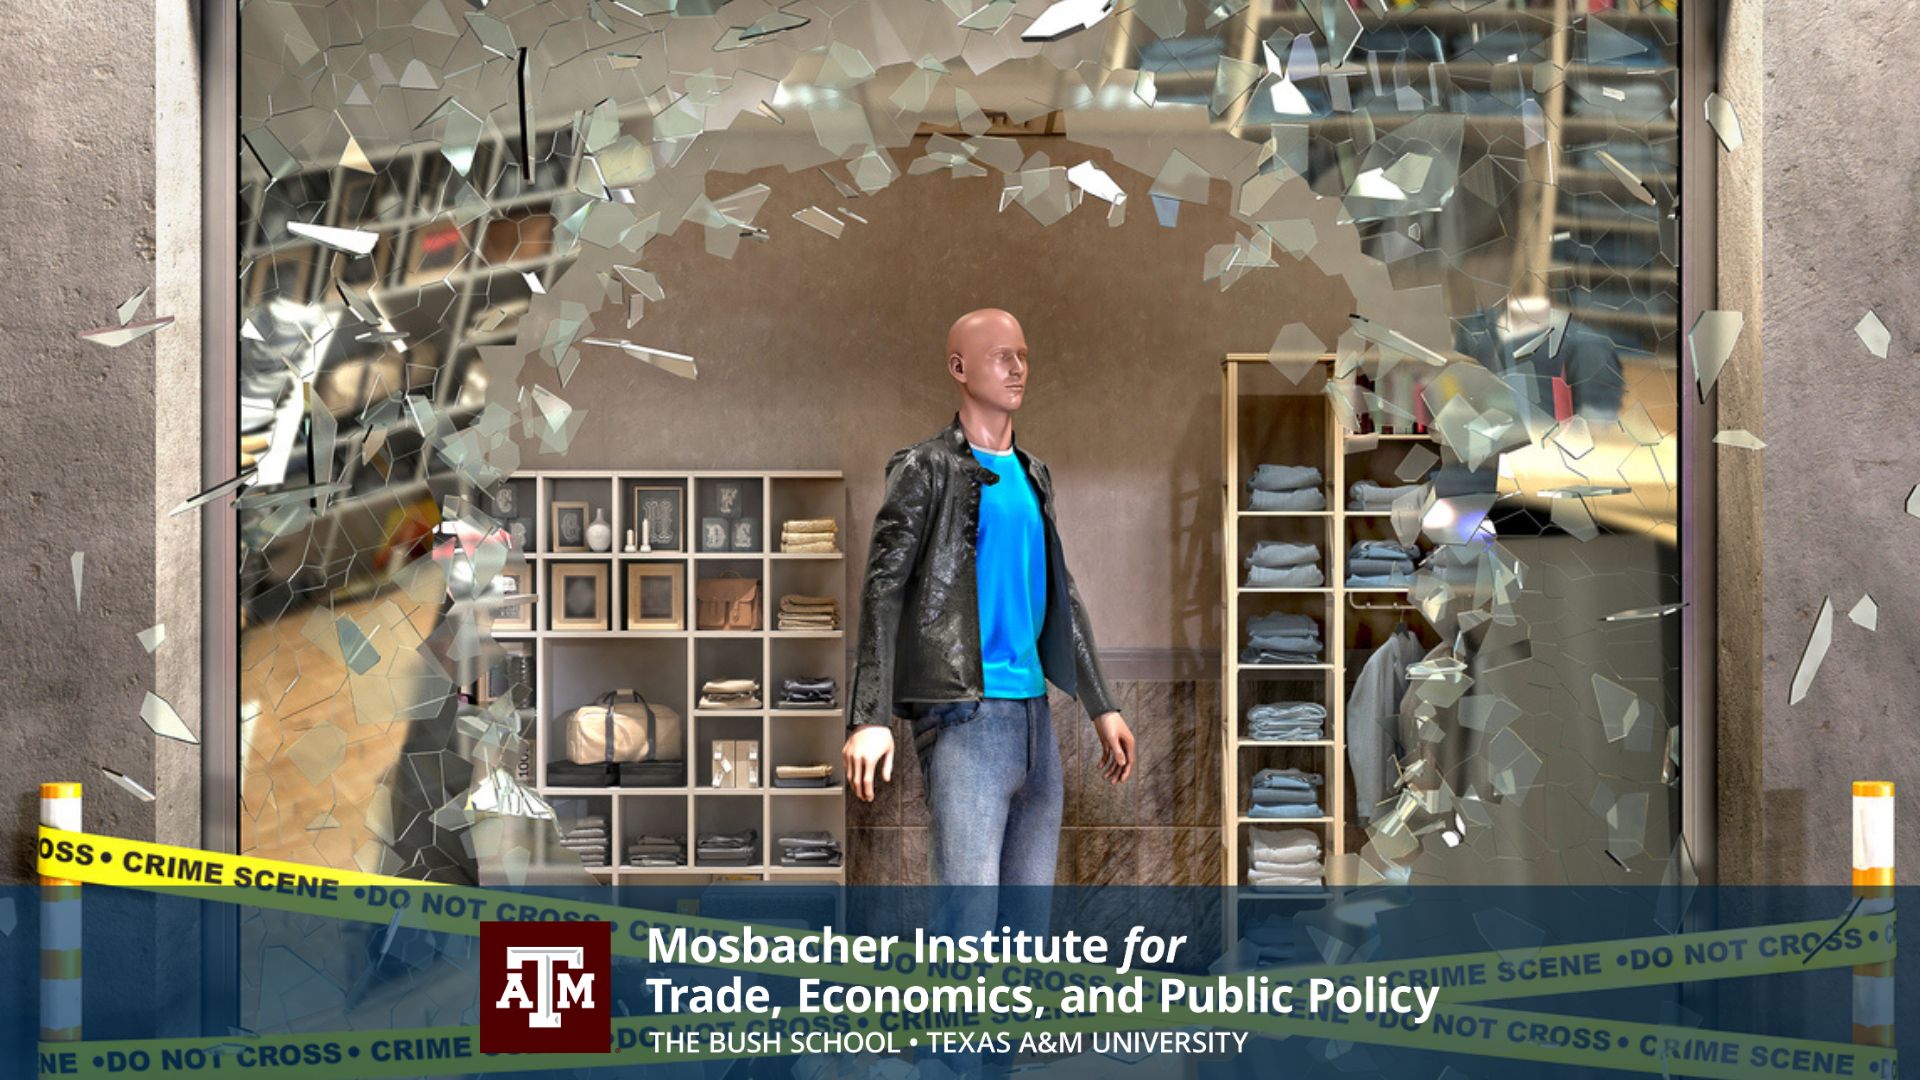 The Rise of Organized Retail Crime in America: Risks Resemble those Seen in Conflict Areas